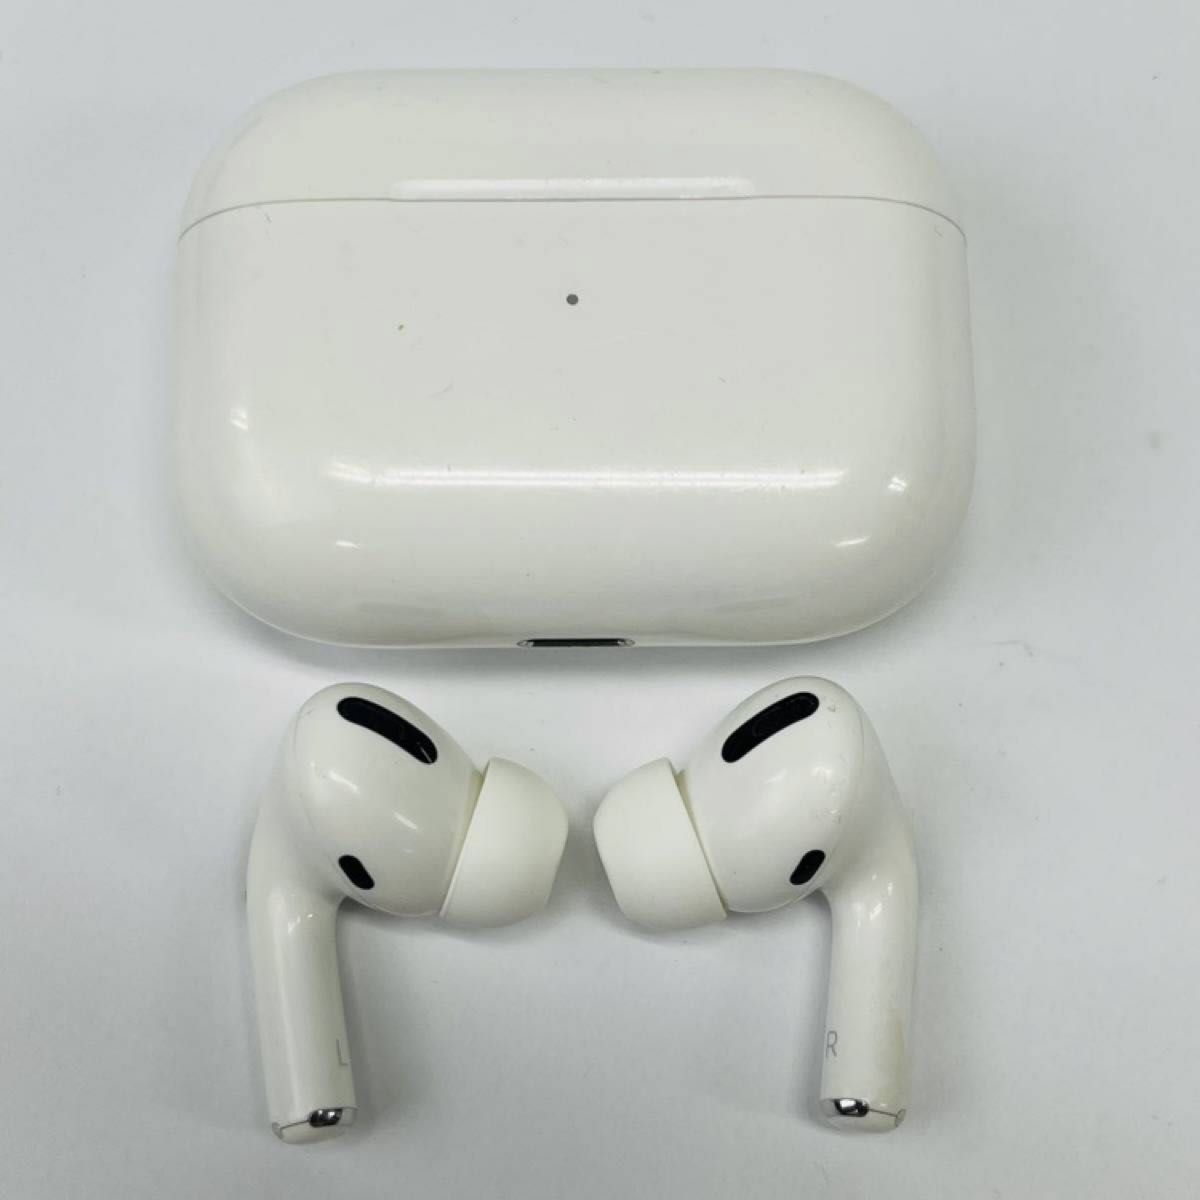 airpodspro 第一世代の新品・未使用品・中古品｜PayPayフリマ